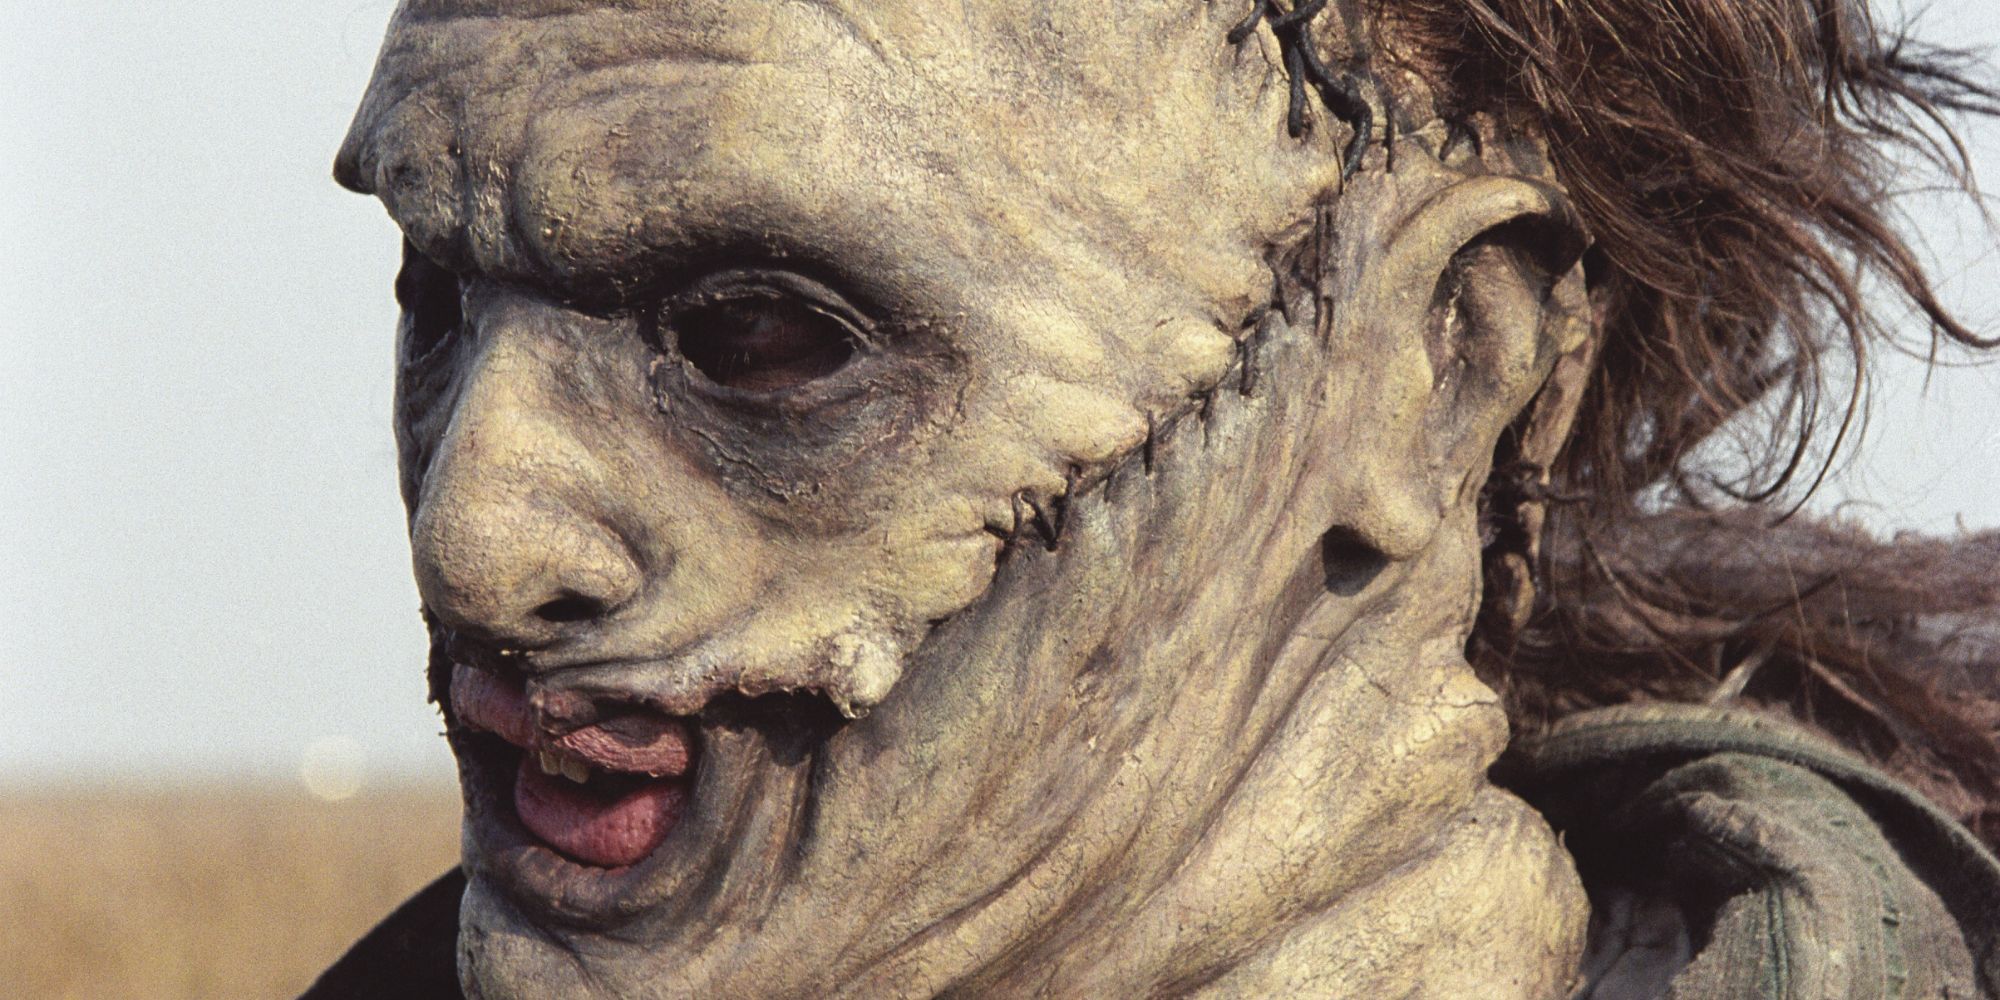 Closeup of Leatherface's mask from The Texas Chainsaw Massacre (2003)